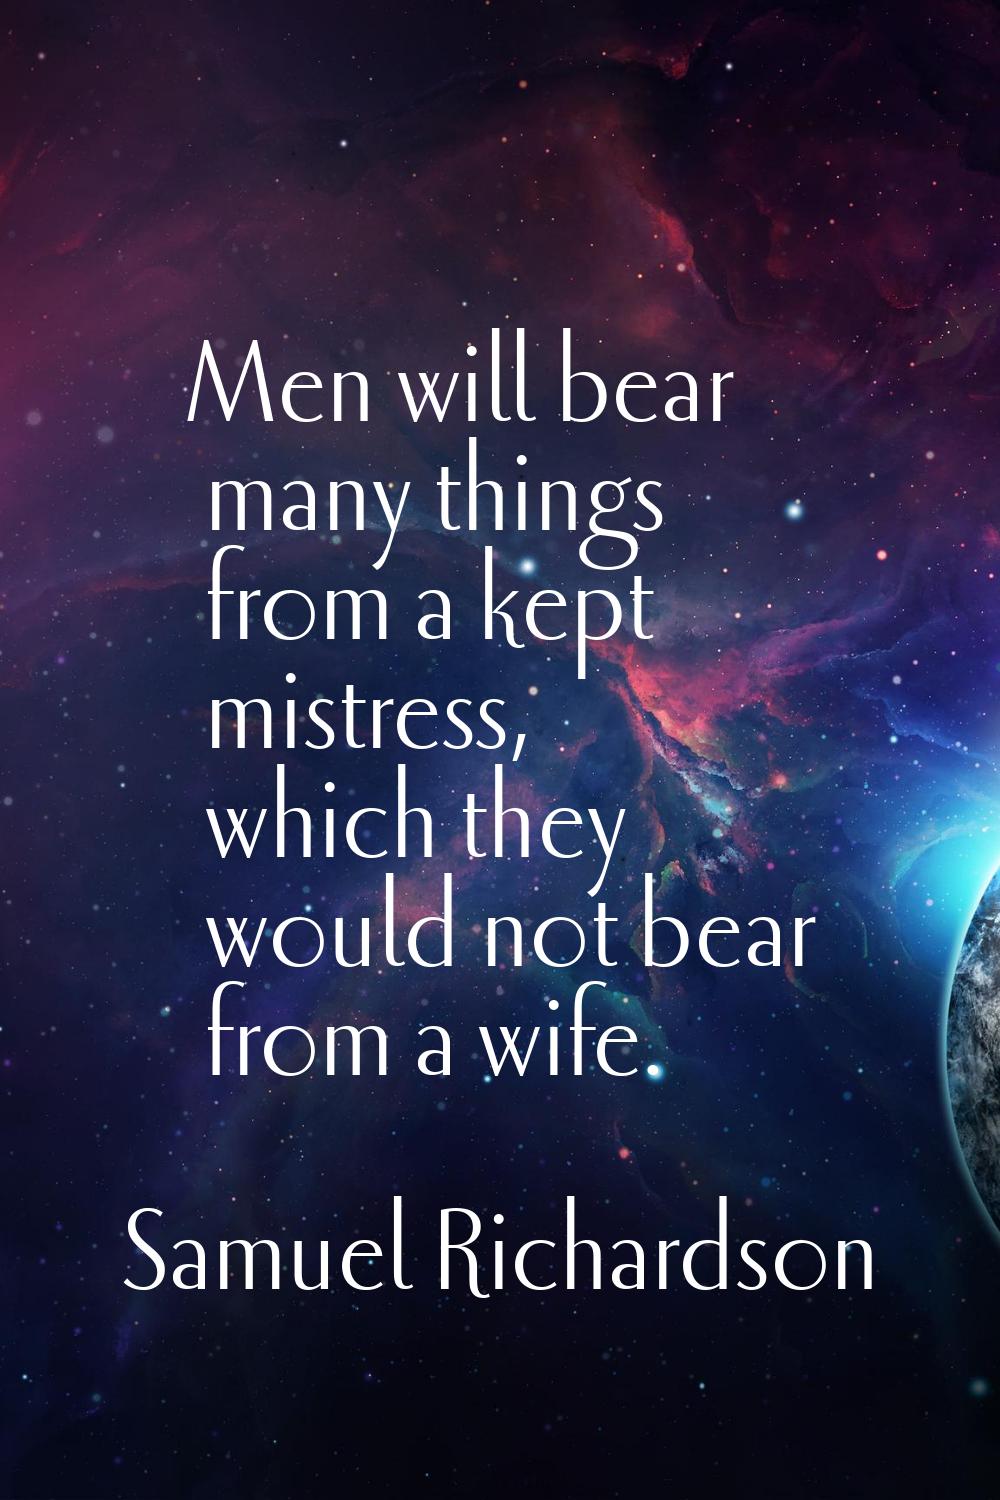 Men will bear many things from a kept mistress, which they would not bear from a wife.